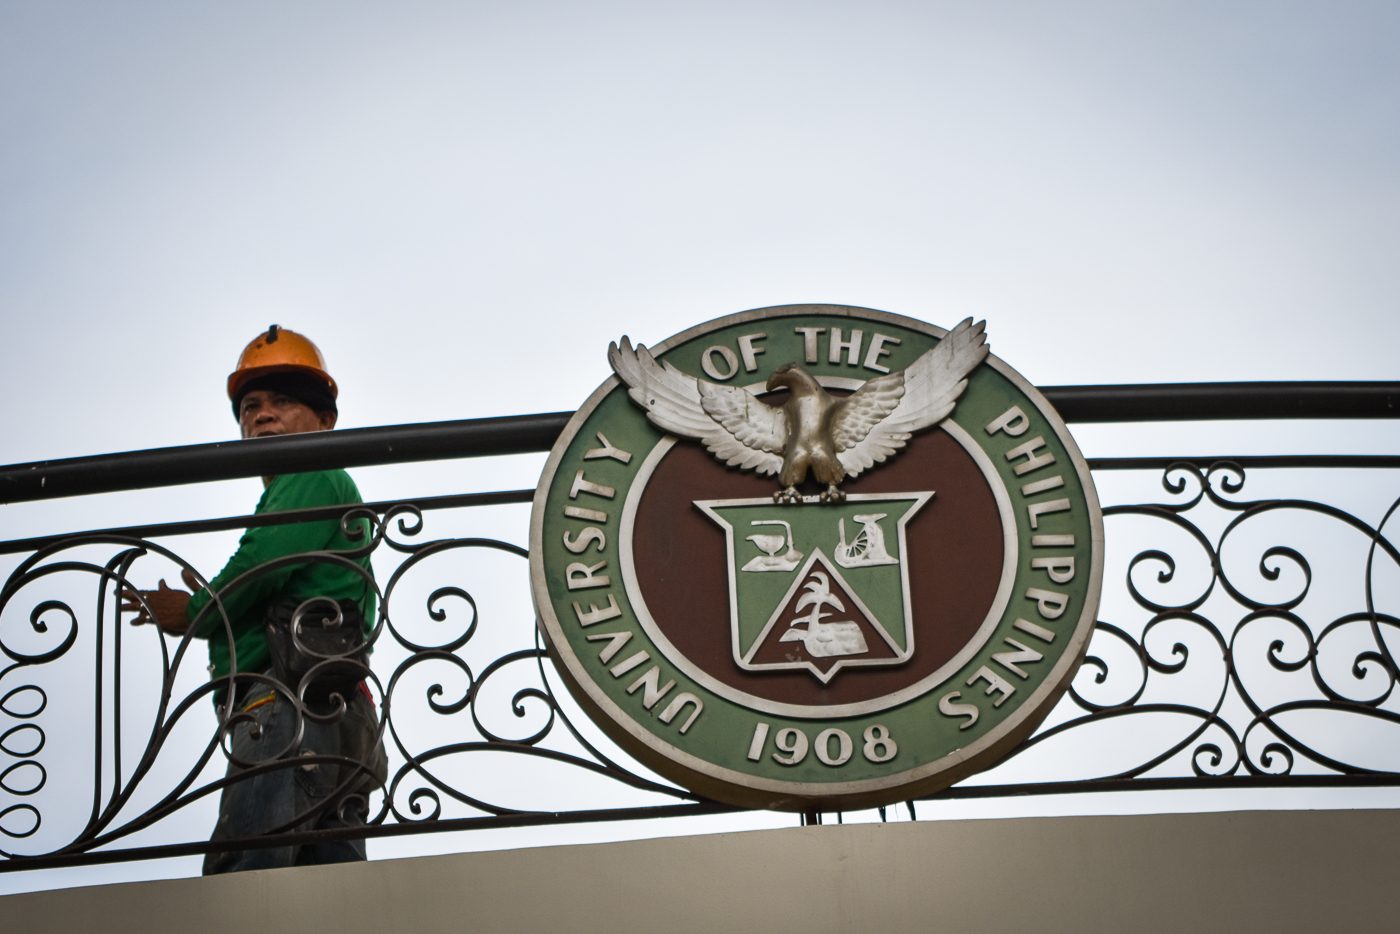 U.P. Diliman frontliners positive for coronavirus now at 14